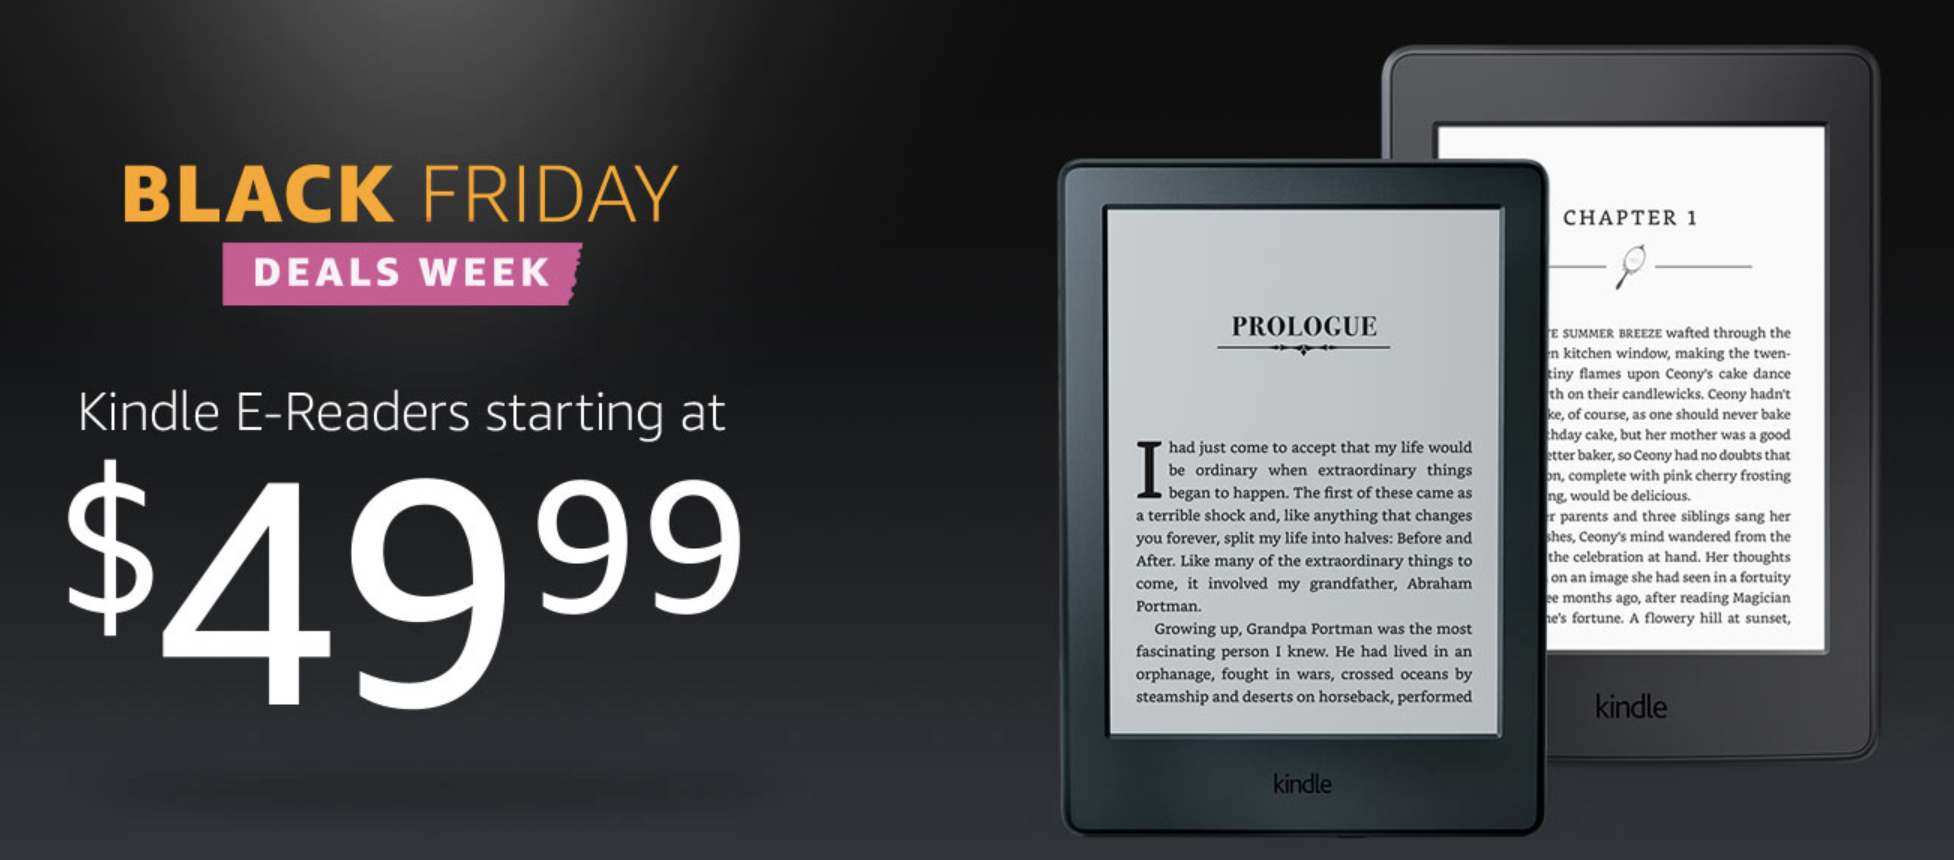 Amazon kicks off its Kindle Ereader Black Friday promotion with prices